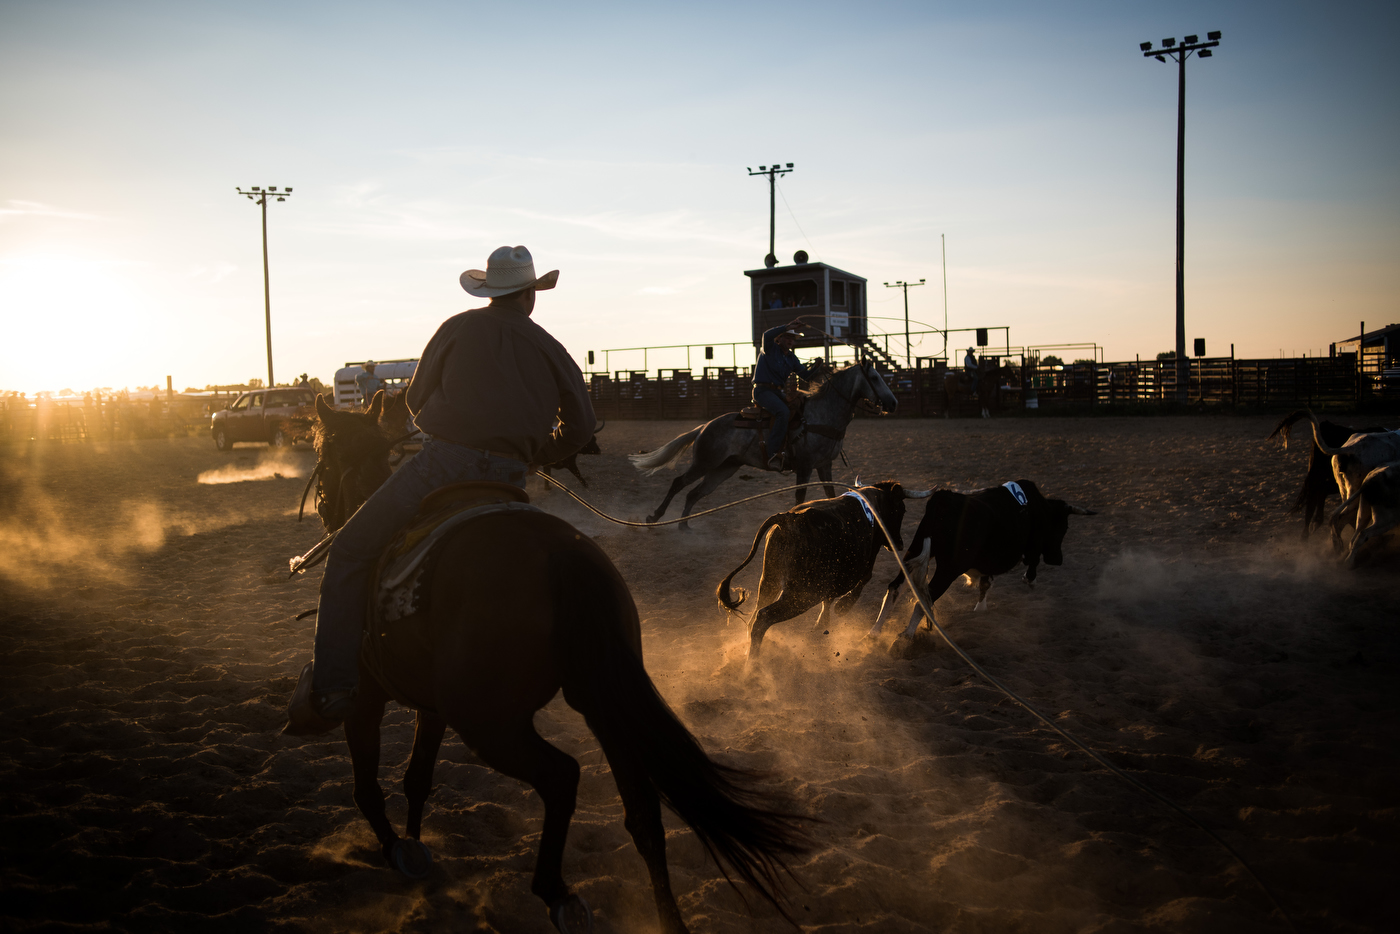  45°31'27.4"N 102°28'11.2"W. 111 miles from the nearest McDonald's.  Cowboys compete in a ranch rodeo at the Perkins County Fairgrounds in Bison, SD. Ranch rodeos, unlike rodeos shown on television or seen around much of the country, are team events 